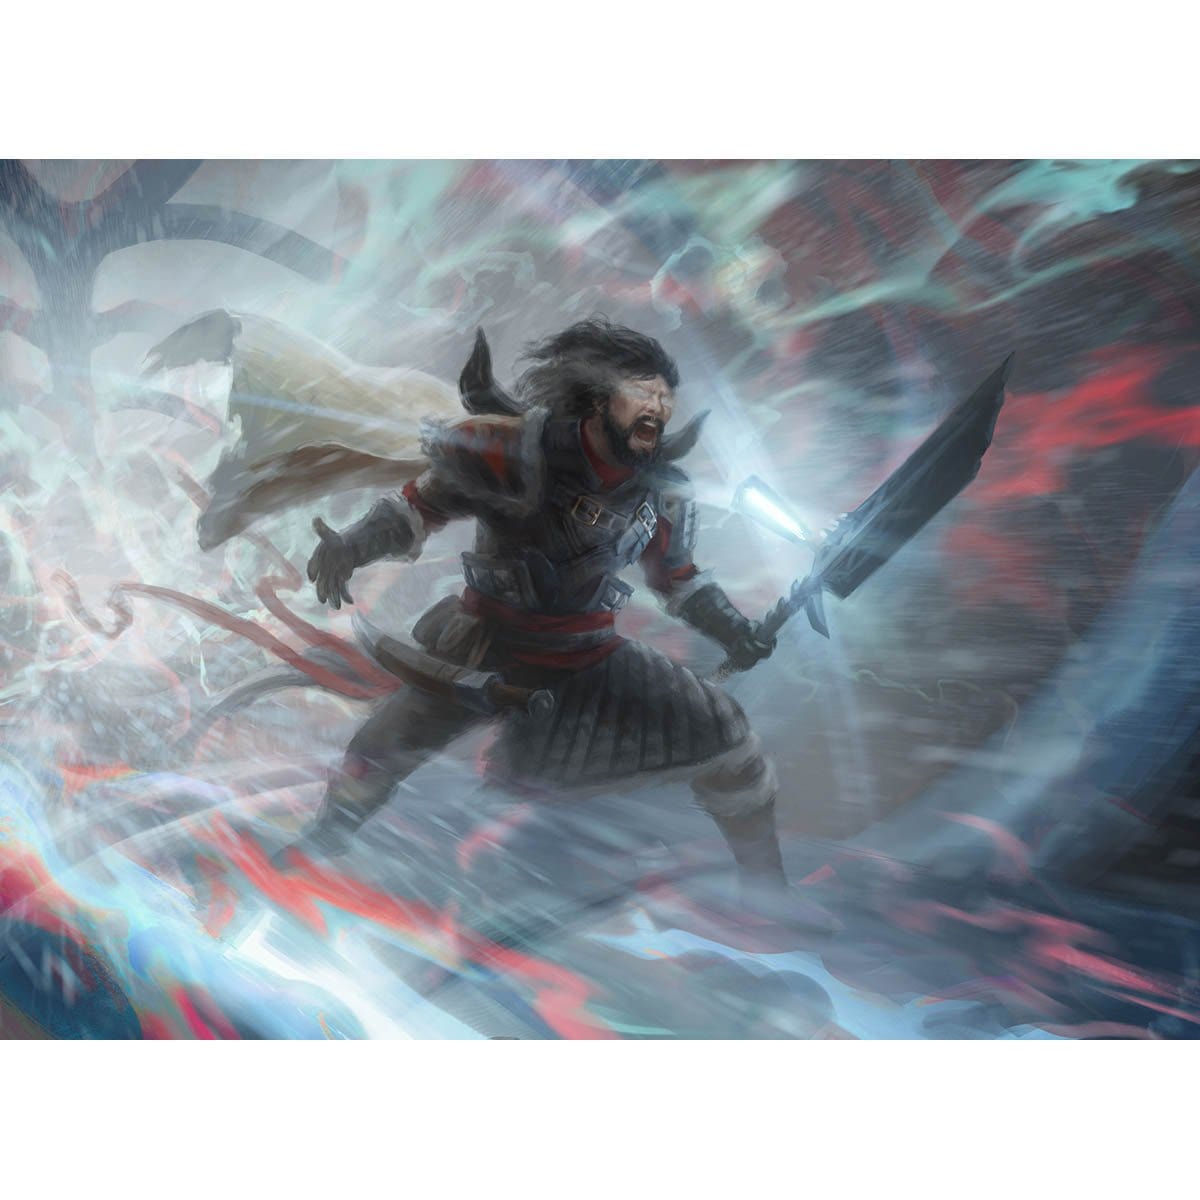 Nexus of Fate Print - Print - Original Magic Art - Accessories for Magic the Gathering and other card games